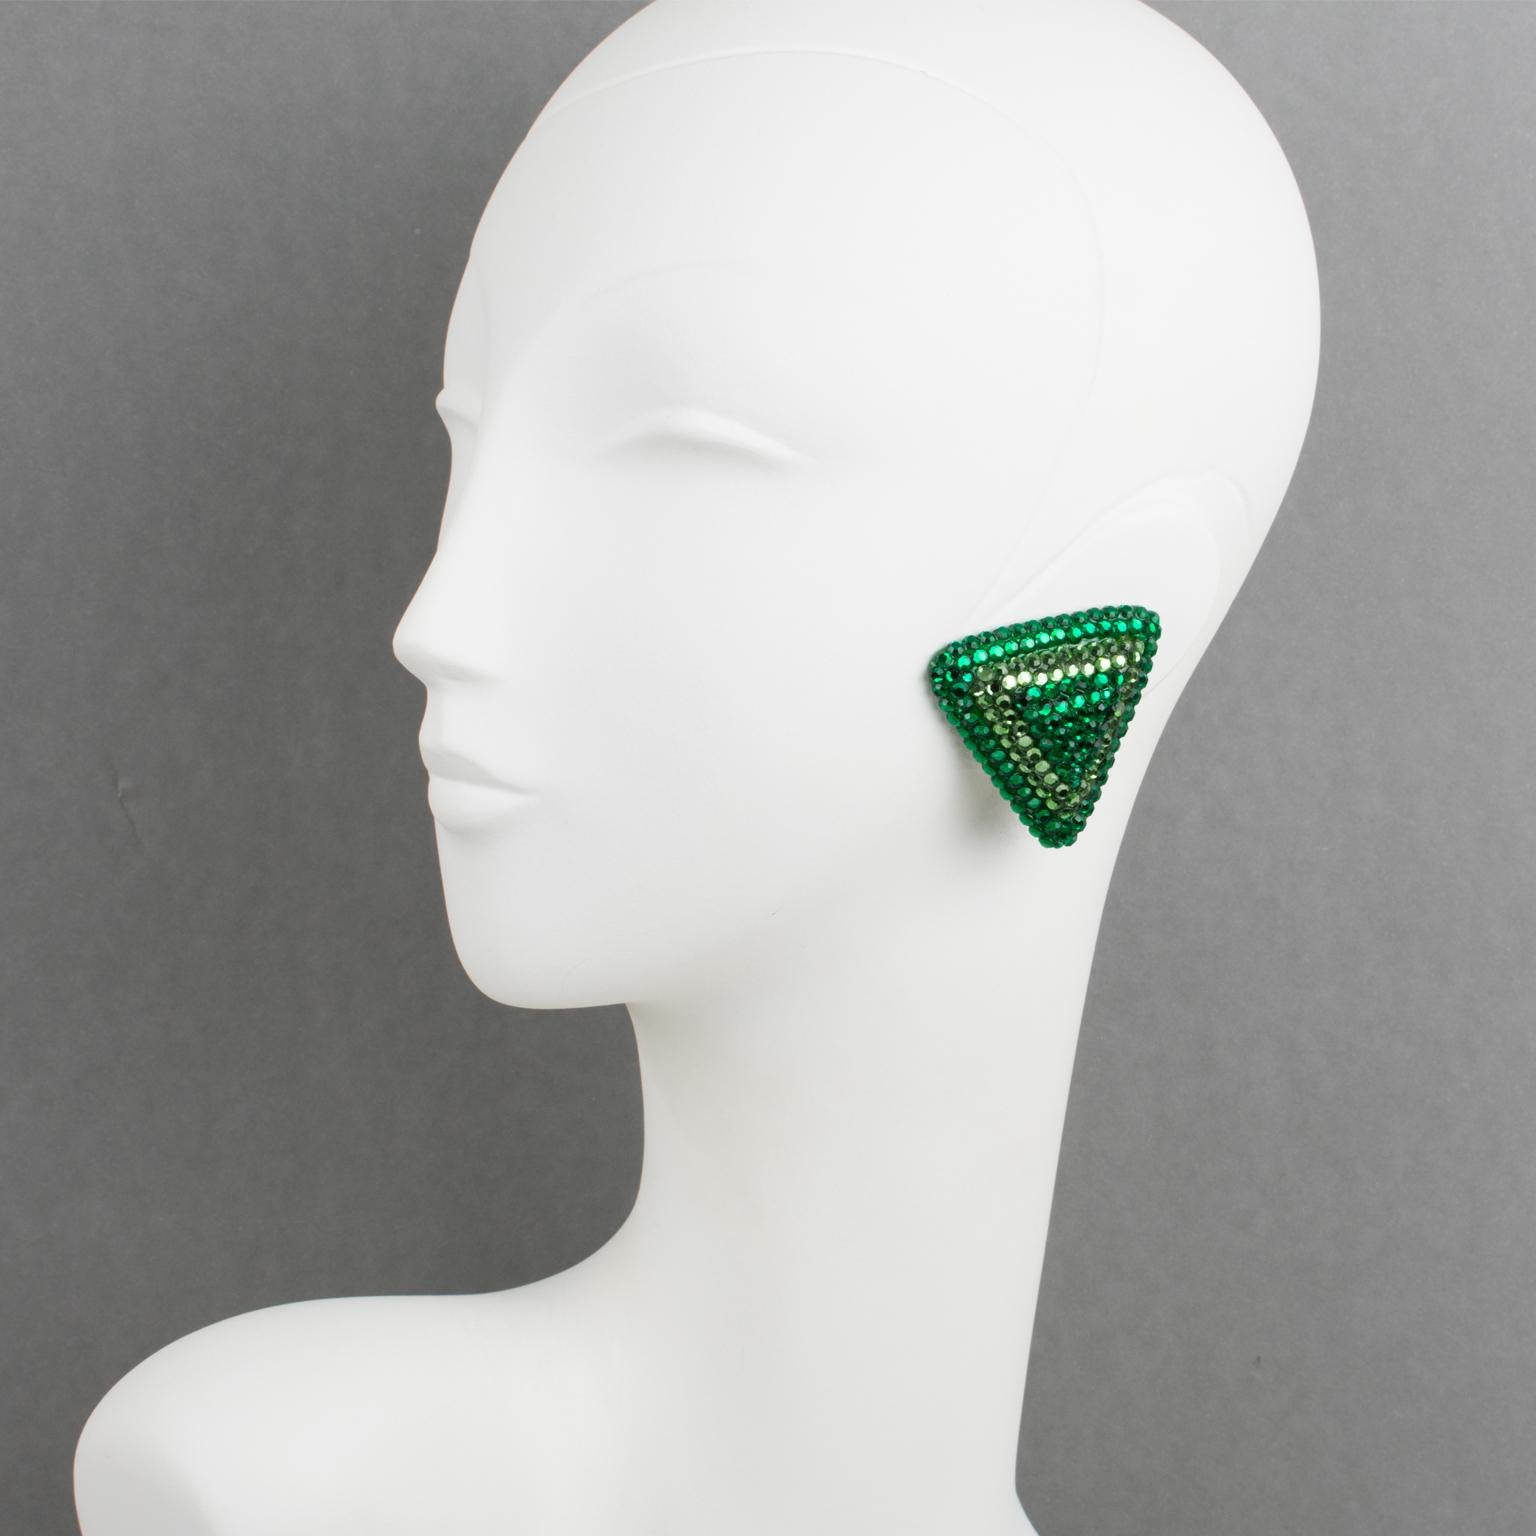 Richard Kerr created these lovely statement clip-on earrings in the 1980s. They are made up of his signature pave rhinestones. The earrings feature an oversized triangle shape, all covered with colorful crystal rhinestones on a green resin